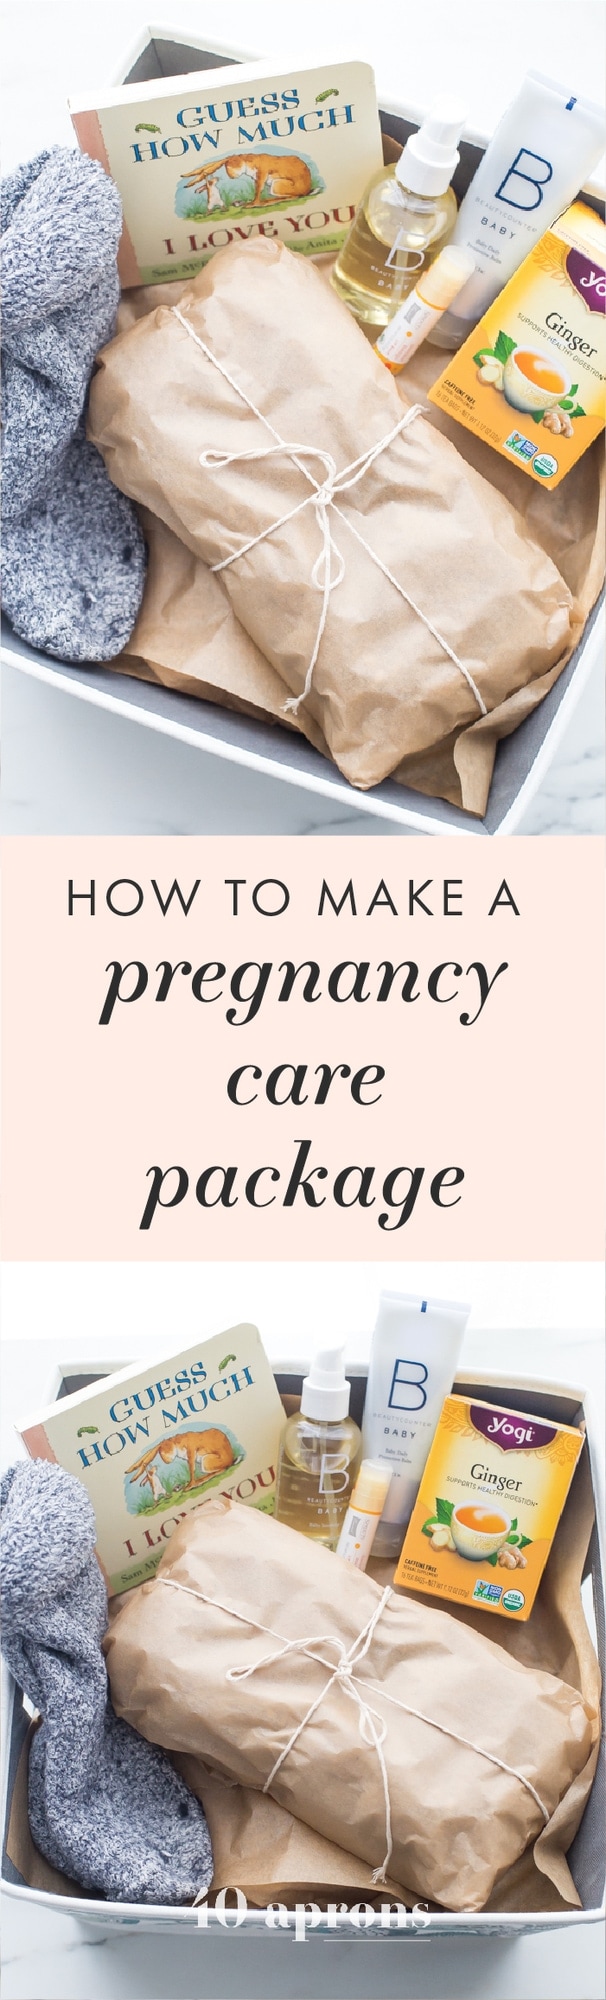 A pregnancy care package can be a fantastic way to show a friend you care and are thinking about her. My guide on how to make a pregnancy care package includes everything you need to make the best pregnancy care package!